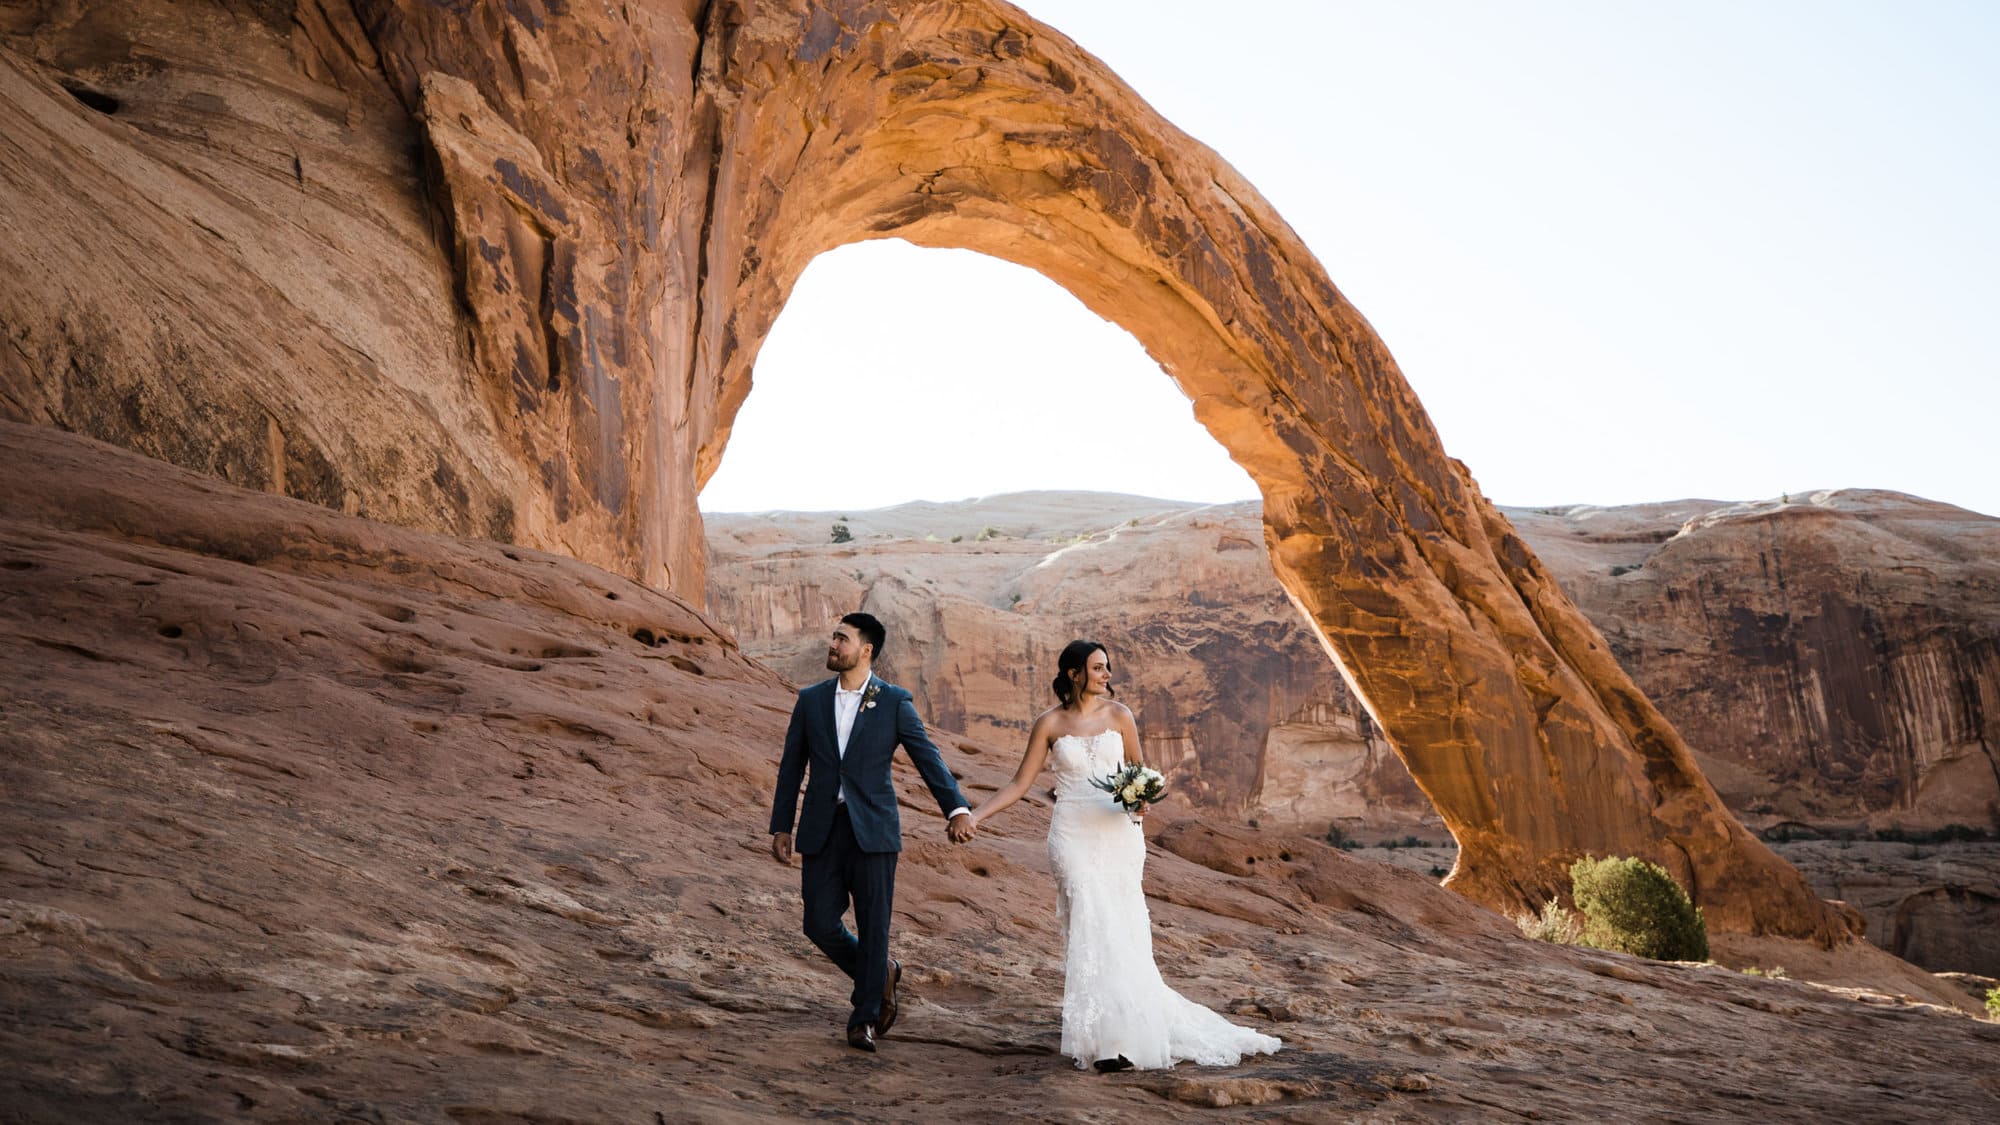 In the desert, sunrise and sunset reign supreme. This desert elopement was a stunning, well earned day set amongst the beautiful red rocks of Utah. 